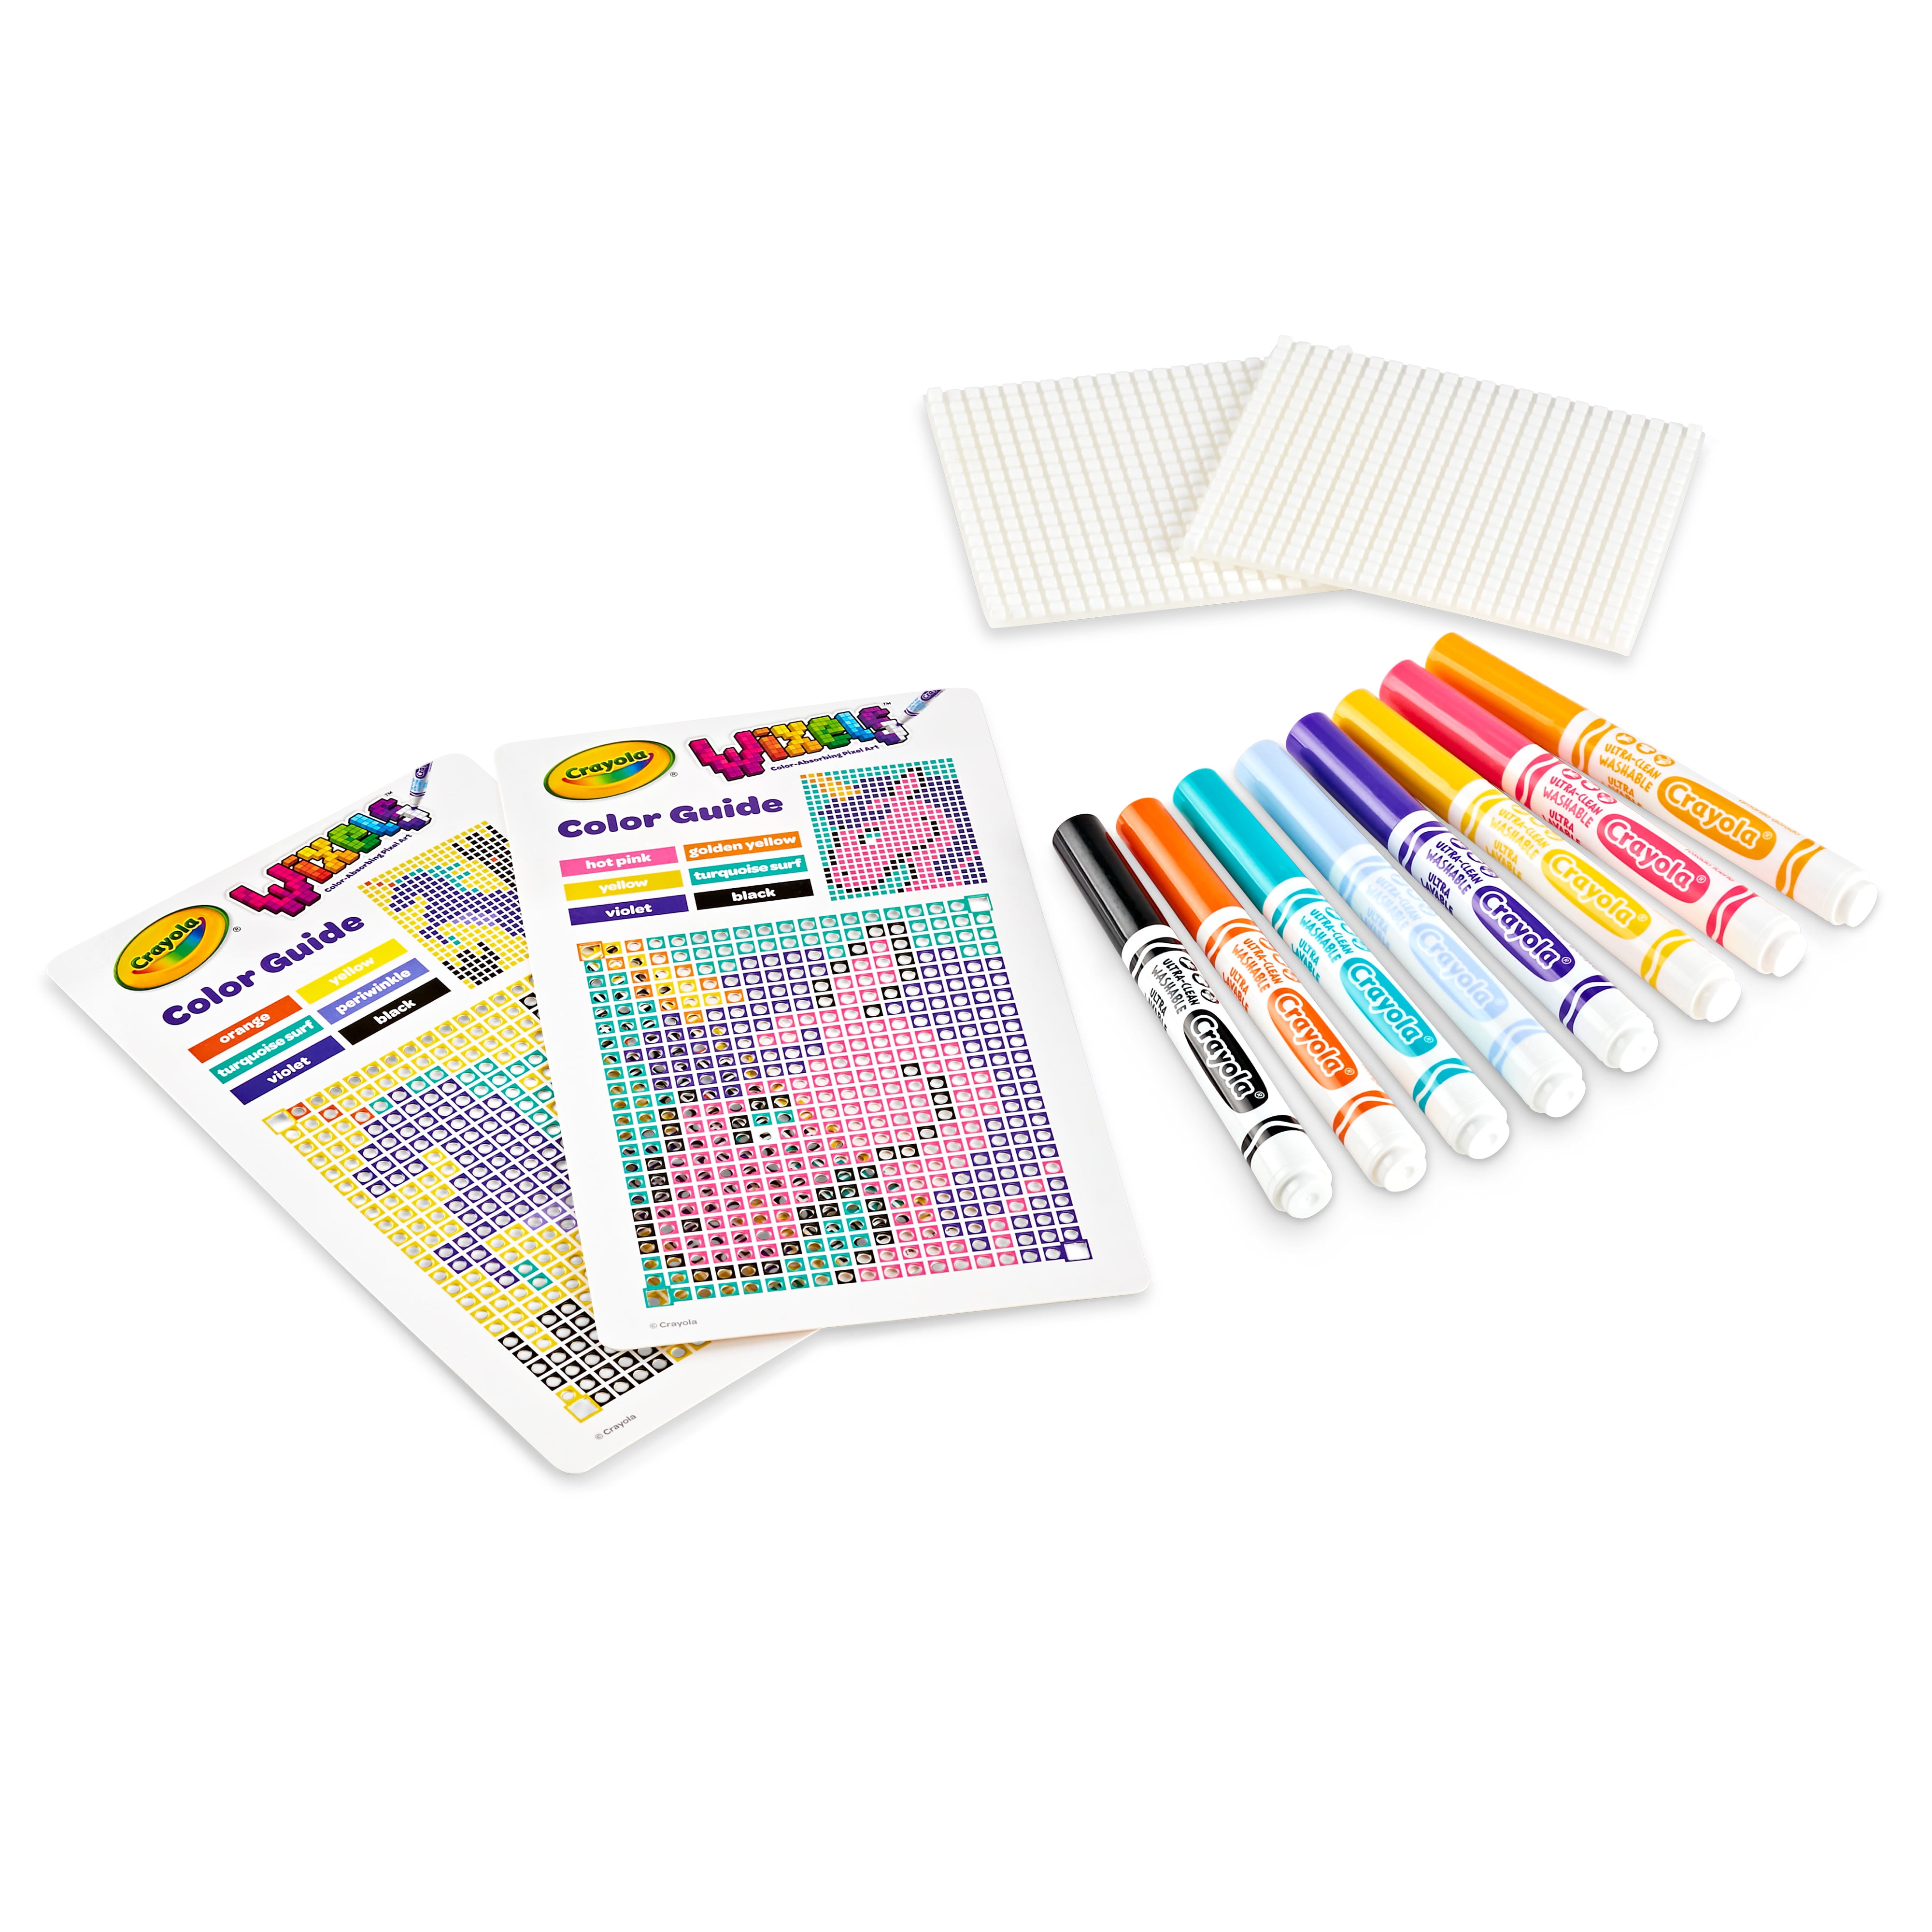 🦄 Crayola Wixels is a fun, innovative way for kids to create colorful